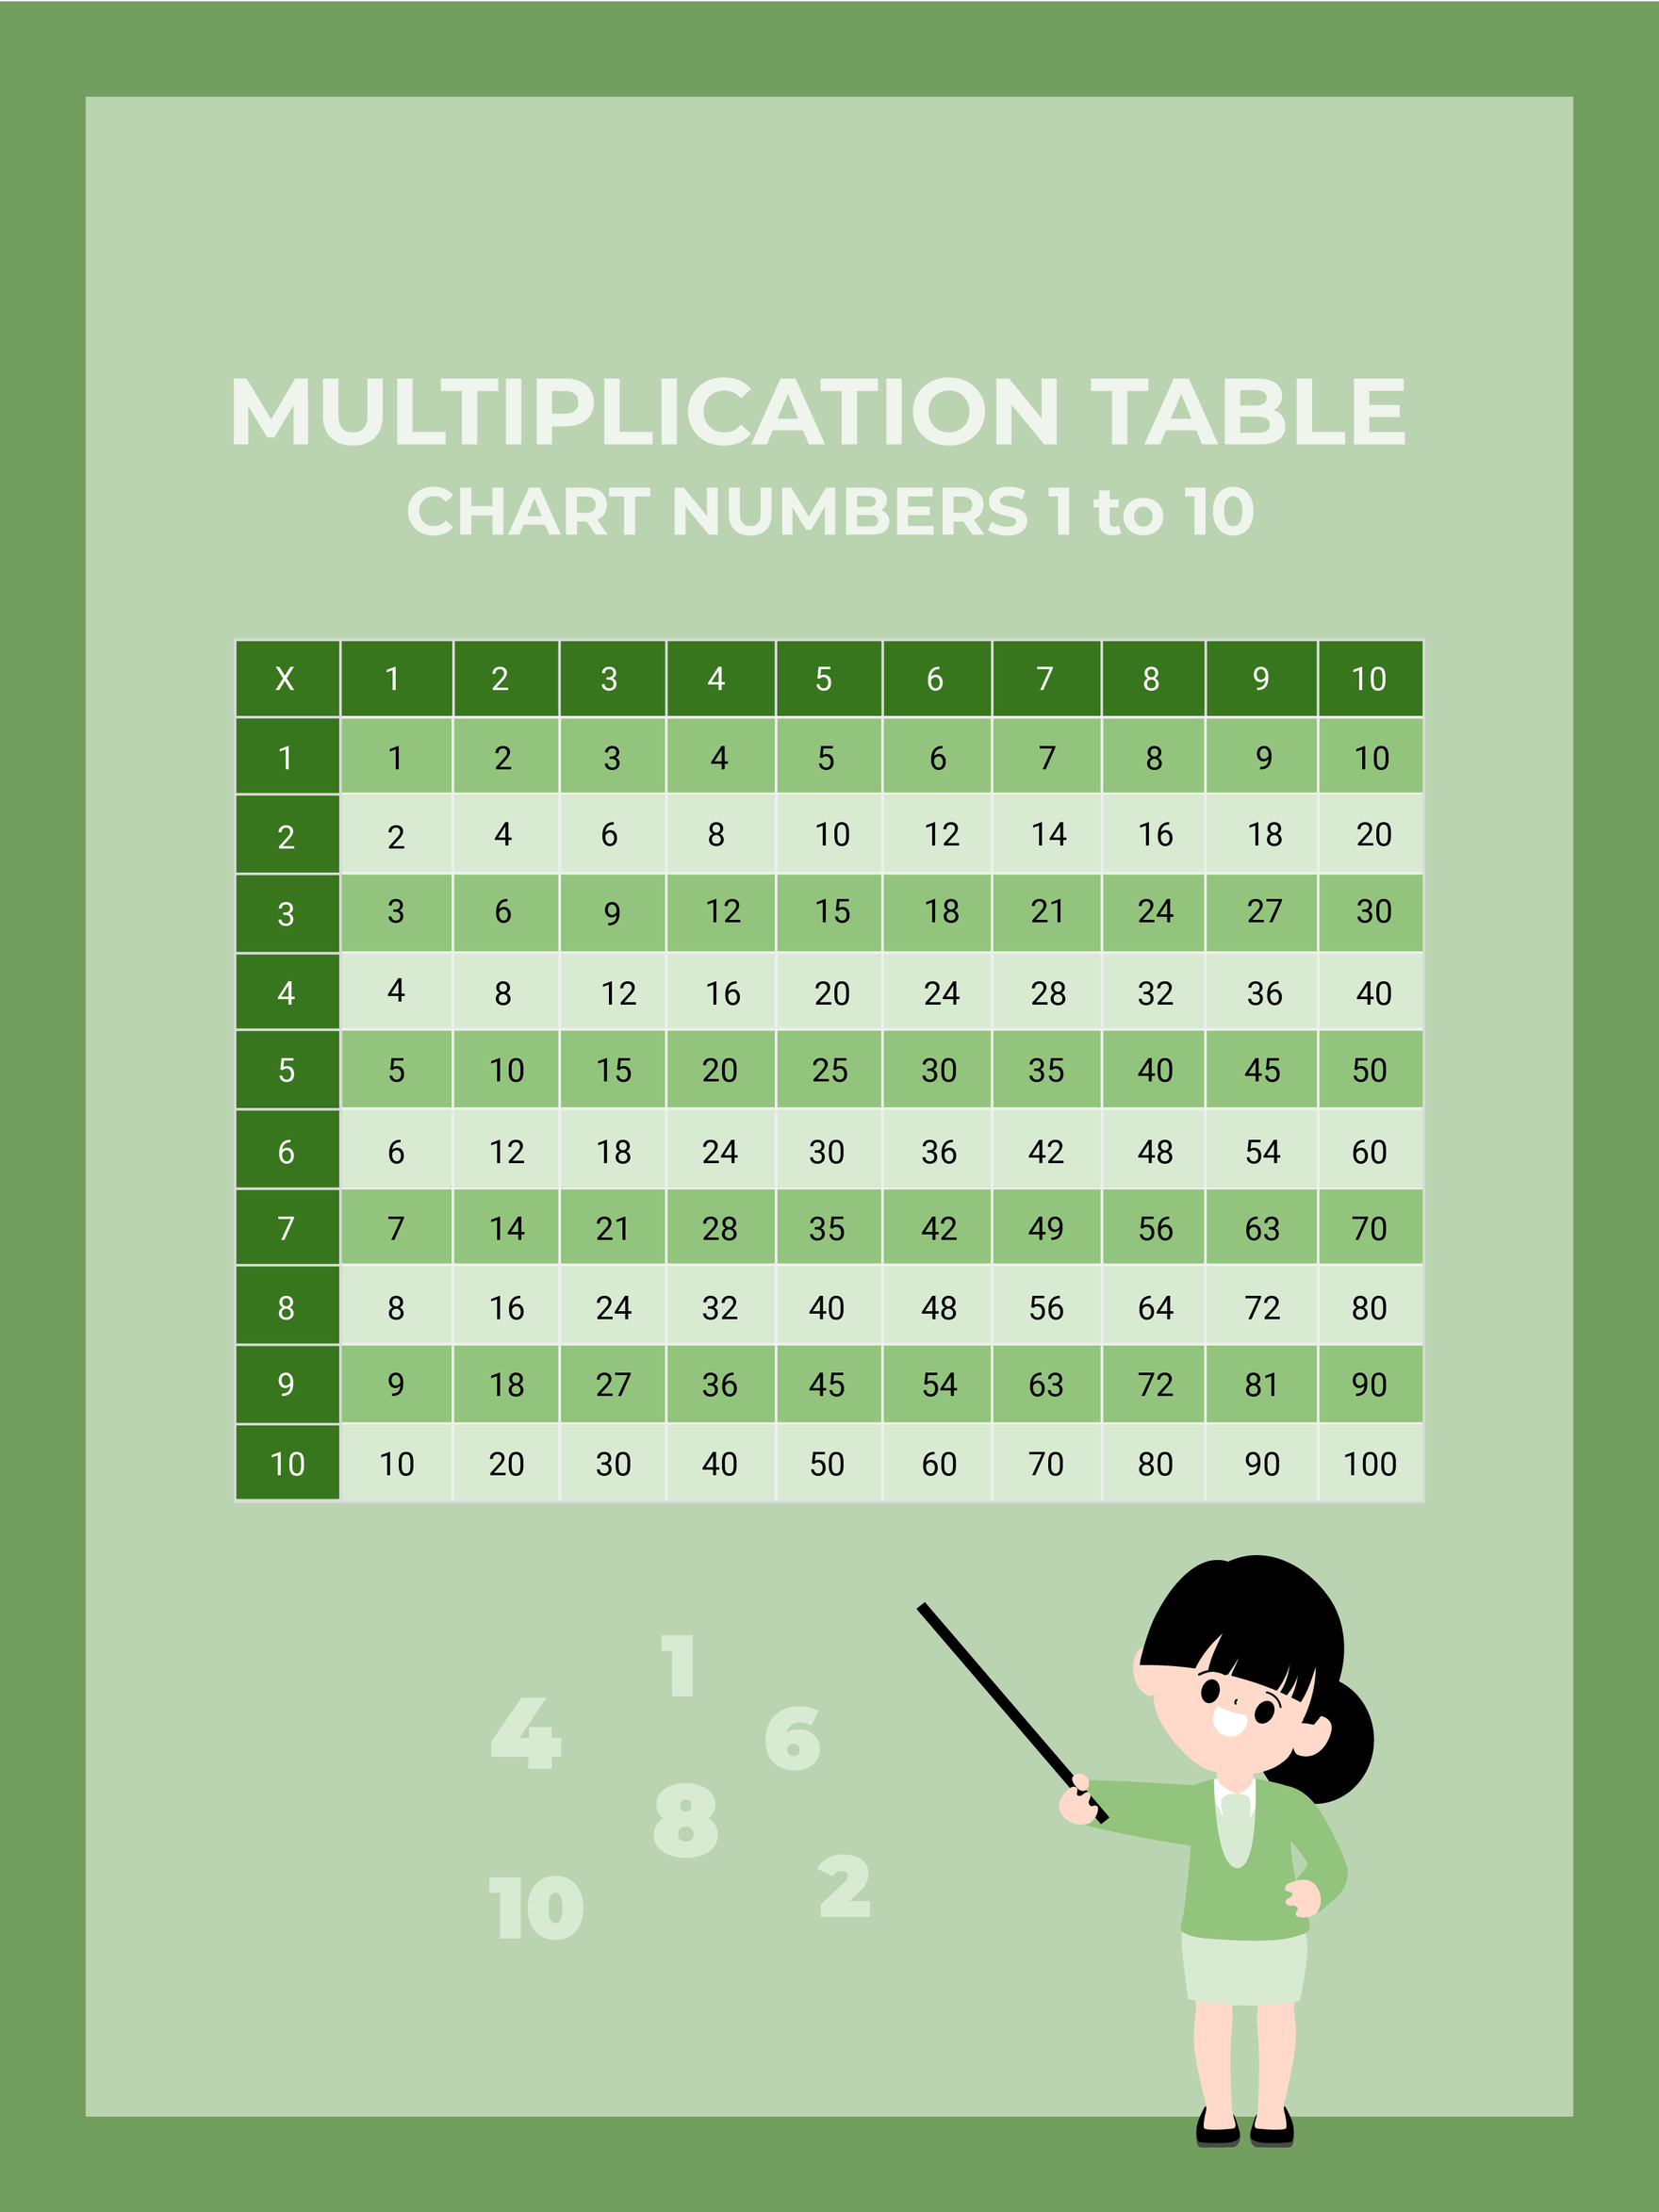 Multiplication Table Chart Numbers 1 To 10 in PDF, Illustrator